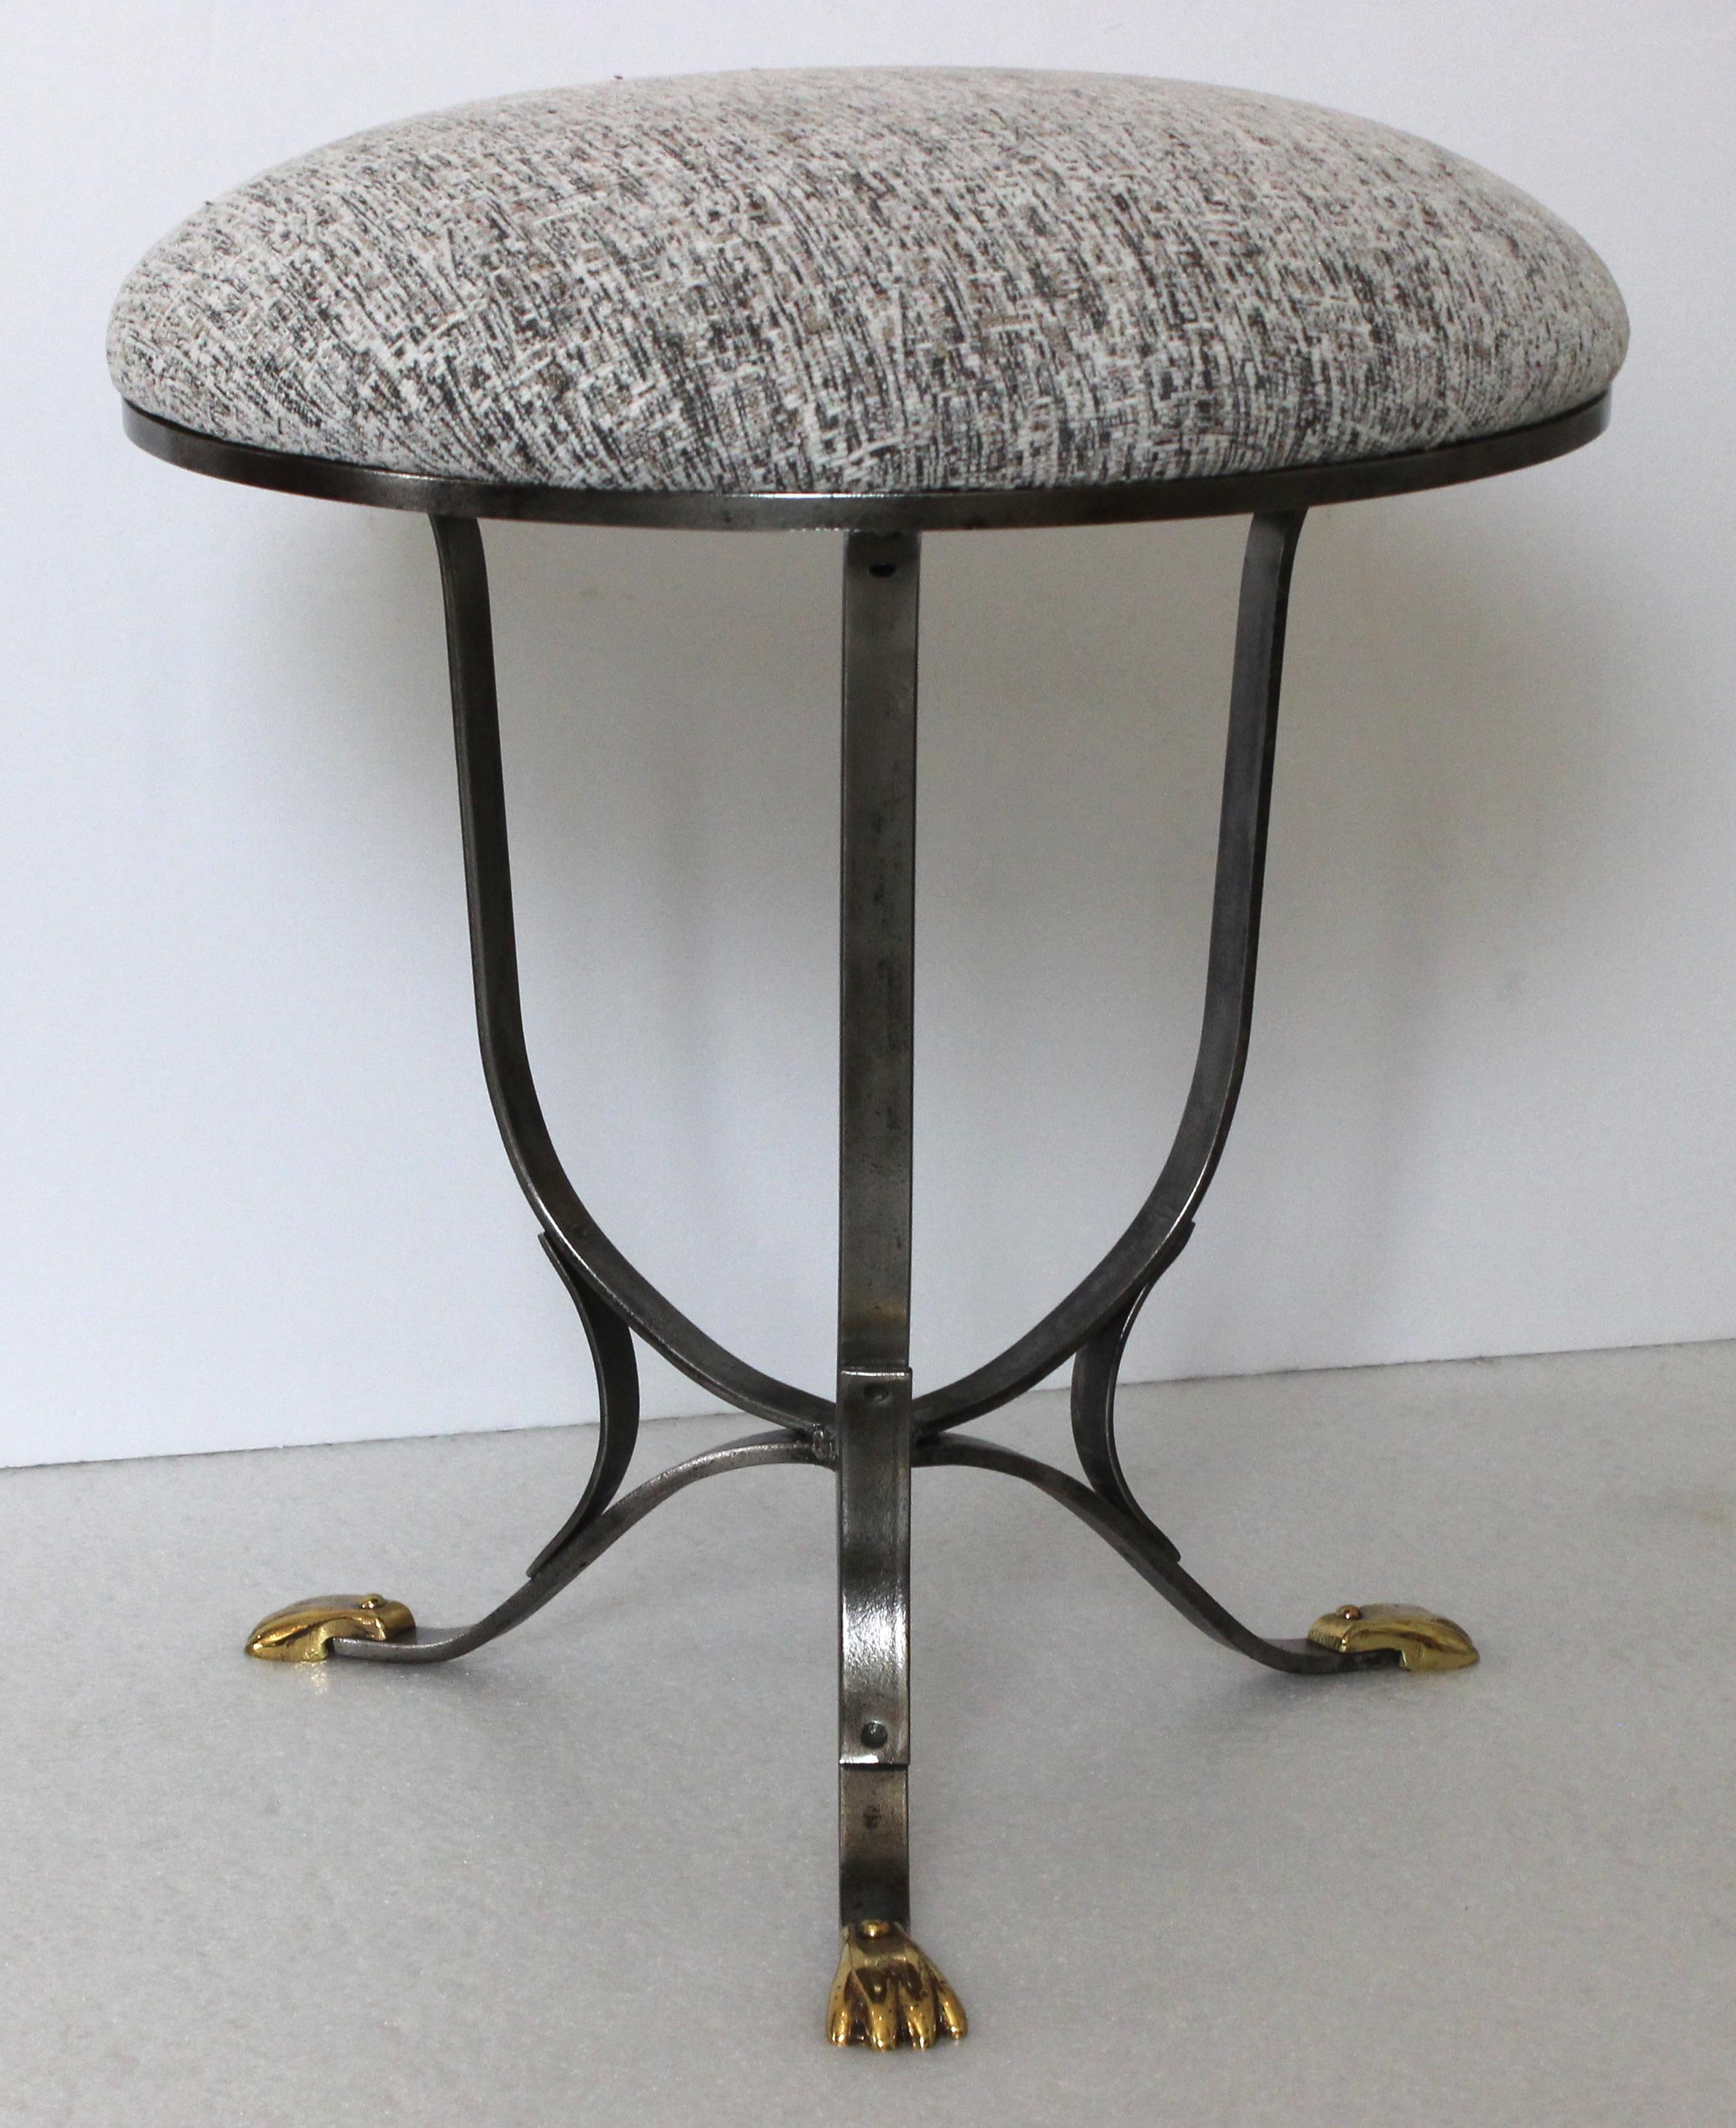 Italian Trouvailles French Empire Campaign Stool For Sale